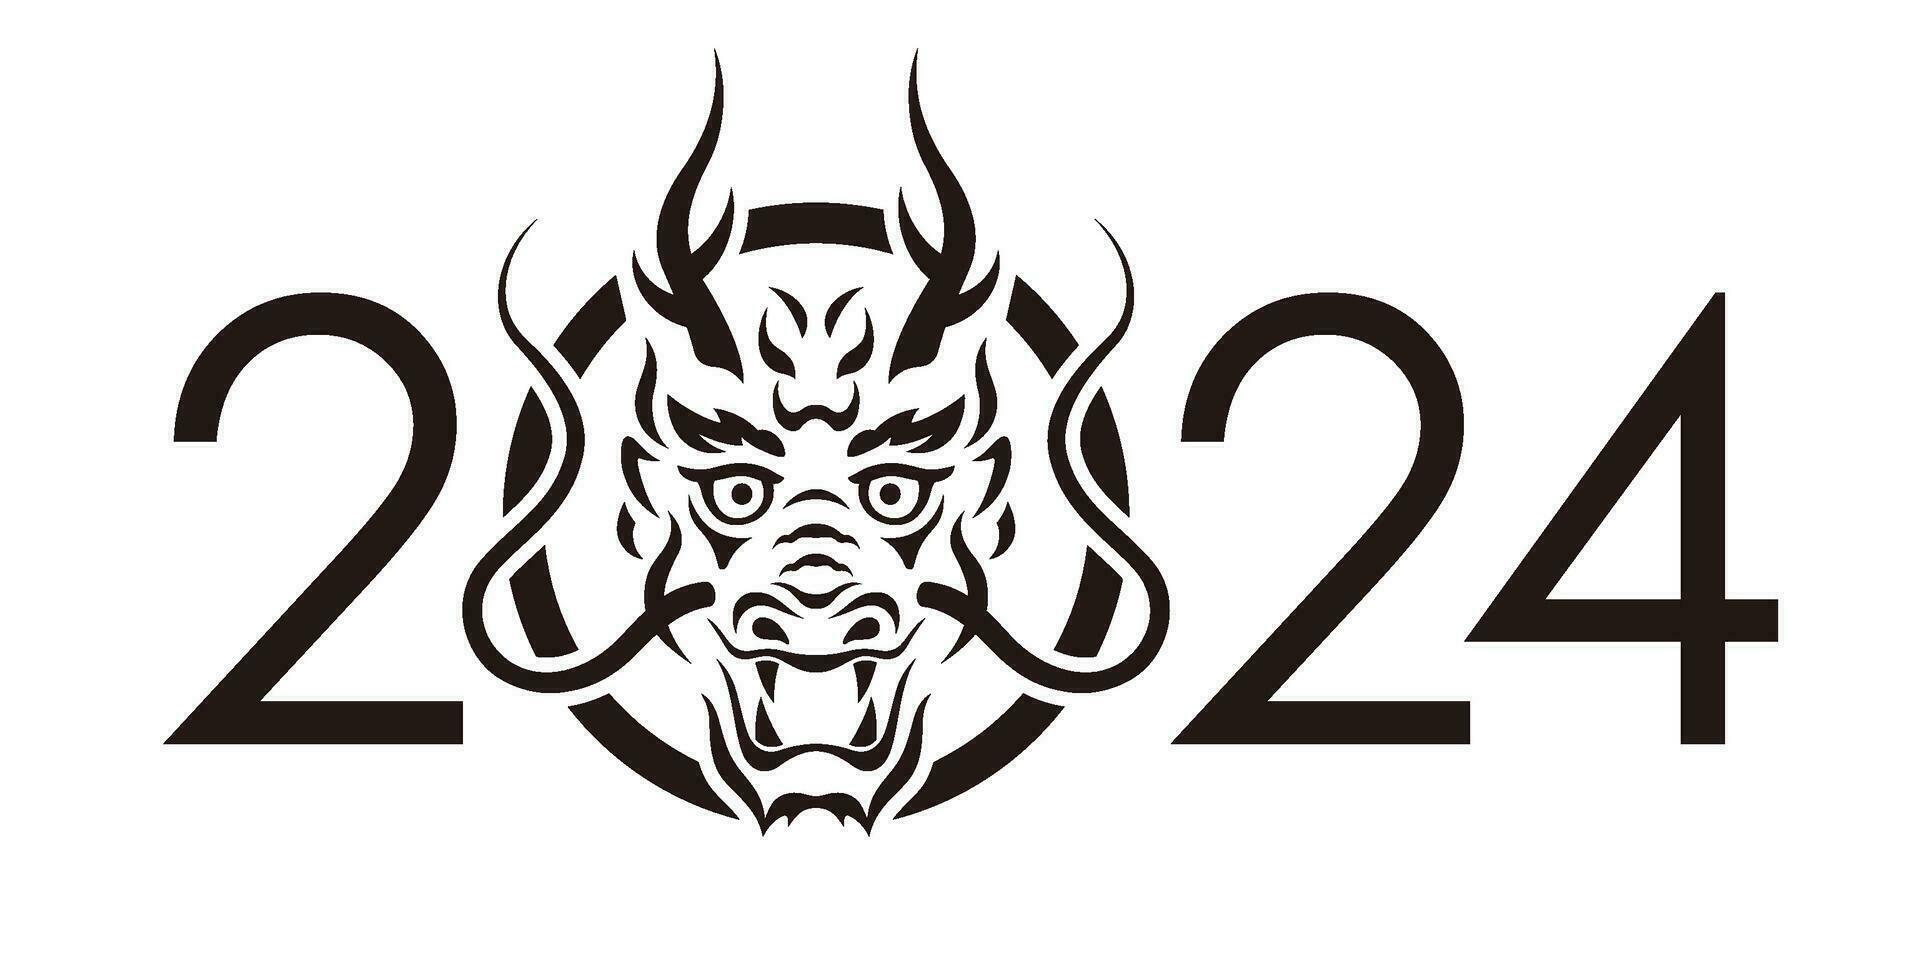 The Year 2024 Vector New Years Greeting Symbol With Dragon Face Isolated On A White Background.